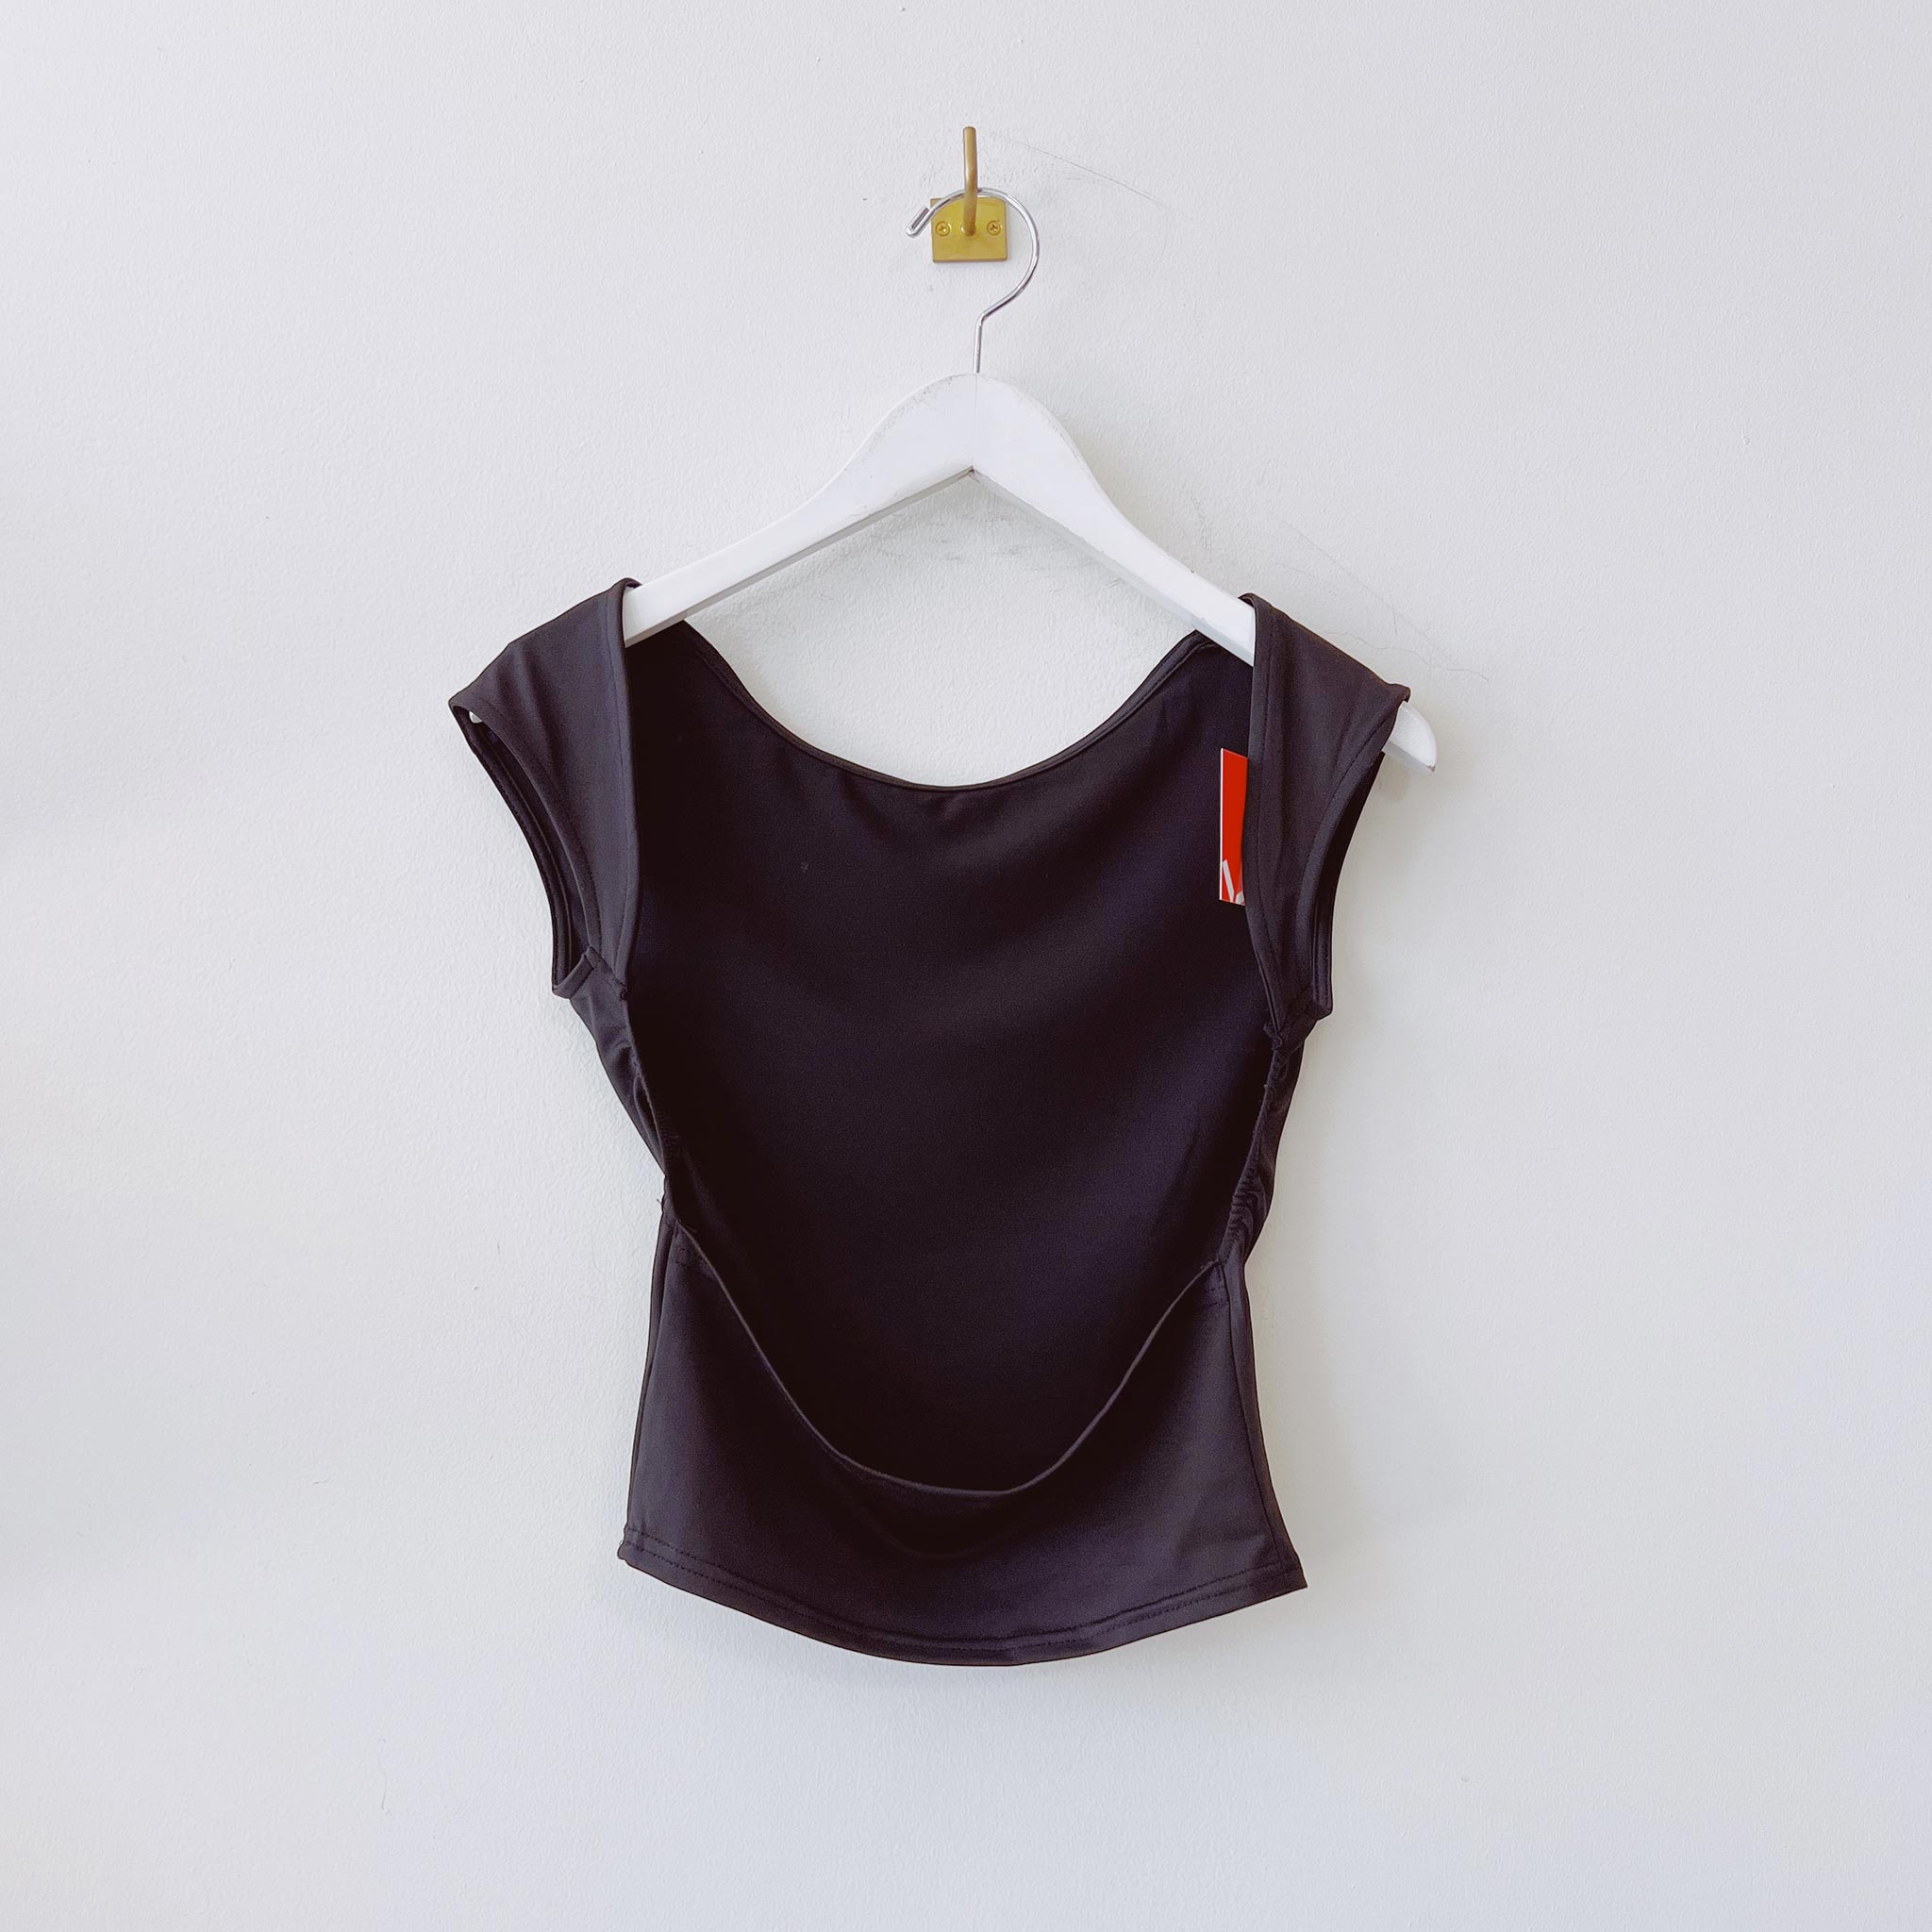 Back hanging photo of the Open Back Ballet Tee - Black.